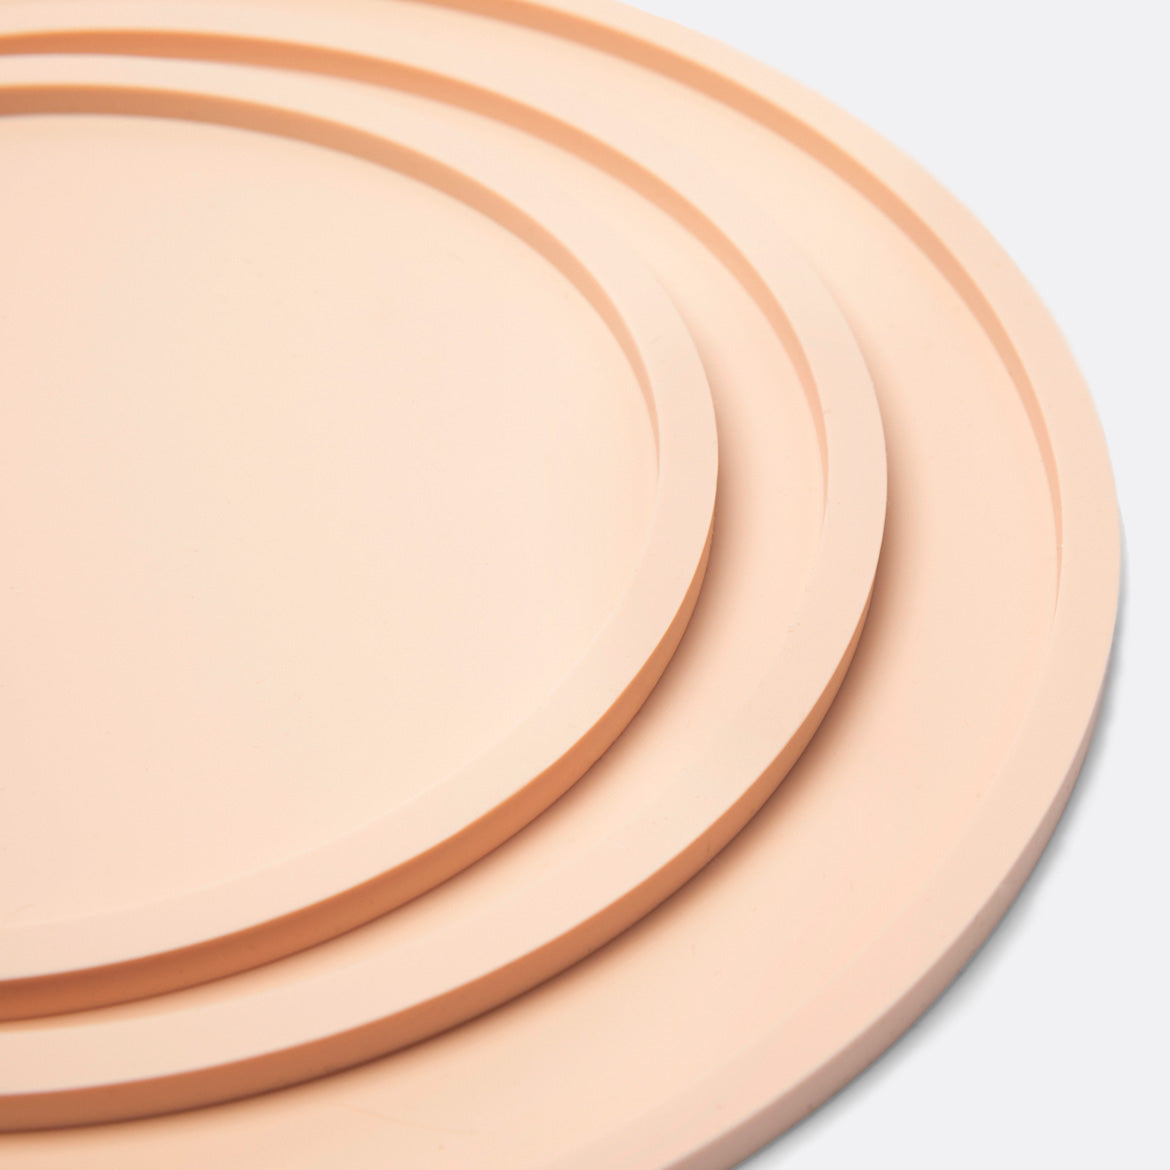 Habit Circle Non-slip Silicon Dog Bowl Placemat three sizes by Waggo in pink - detail view